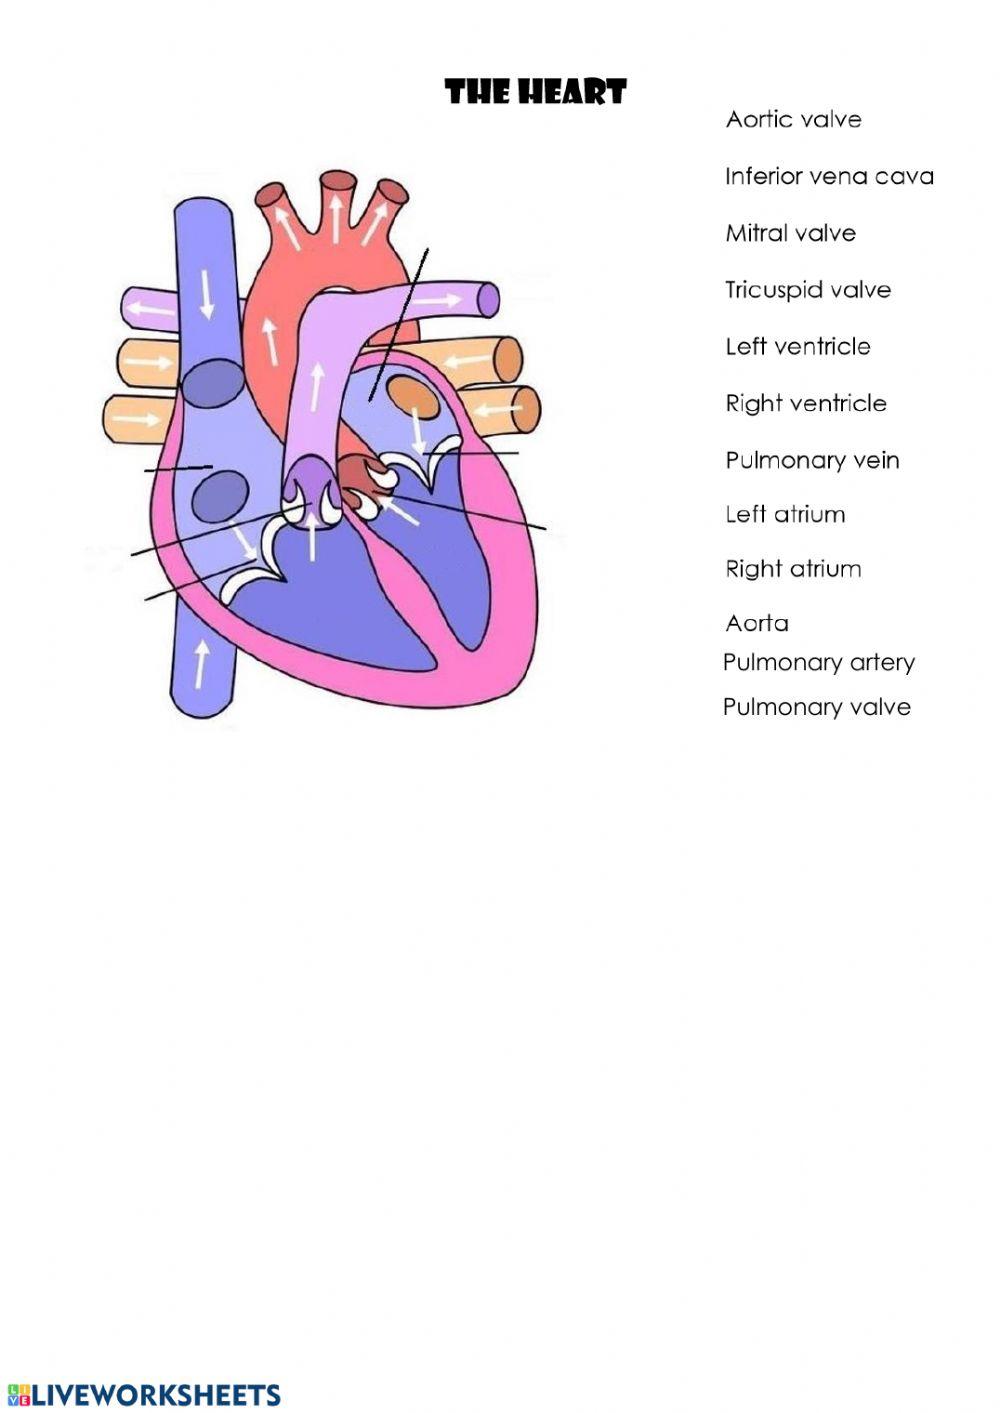 Parts of the heart